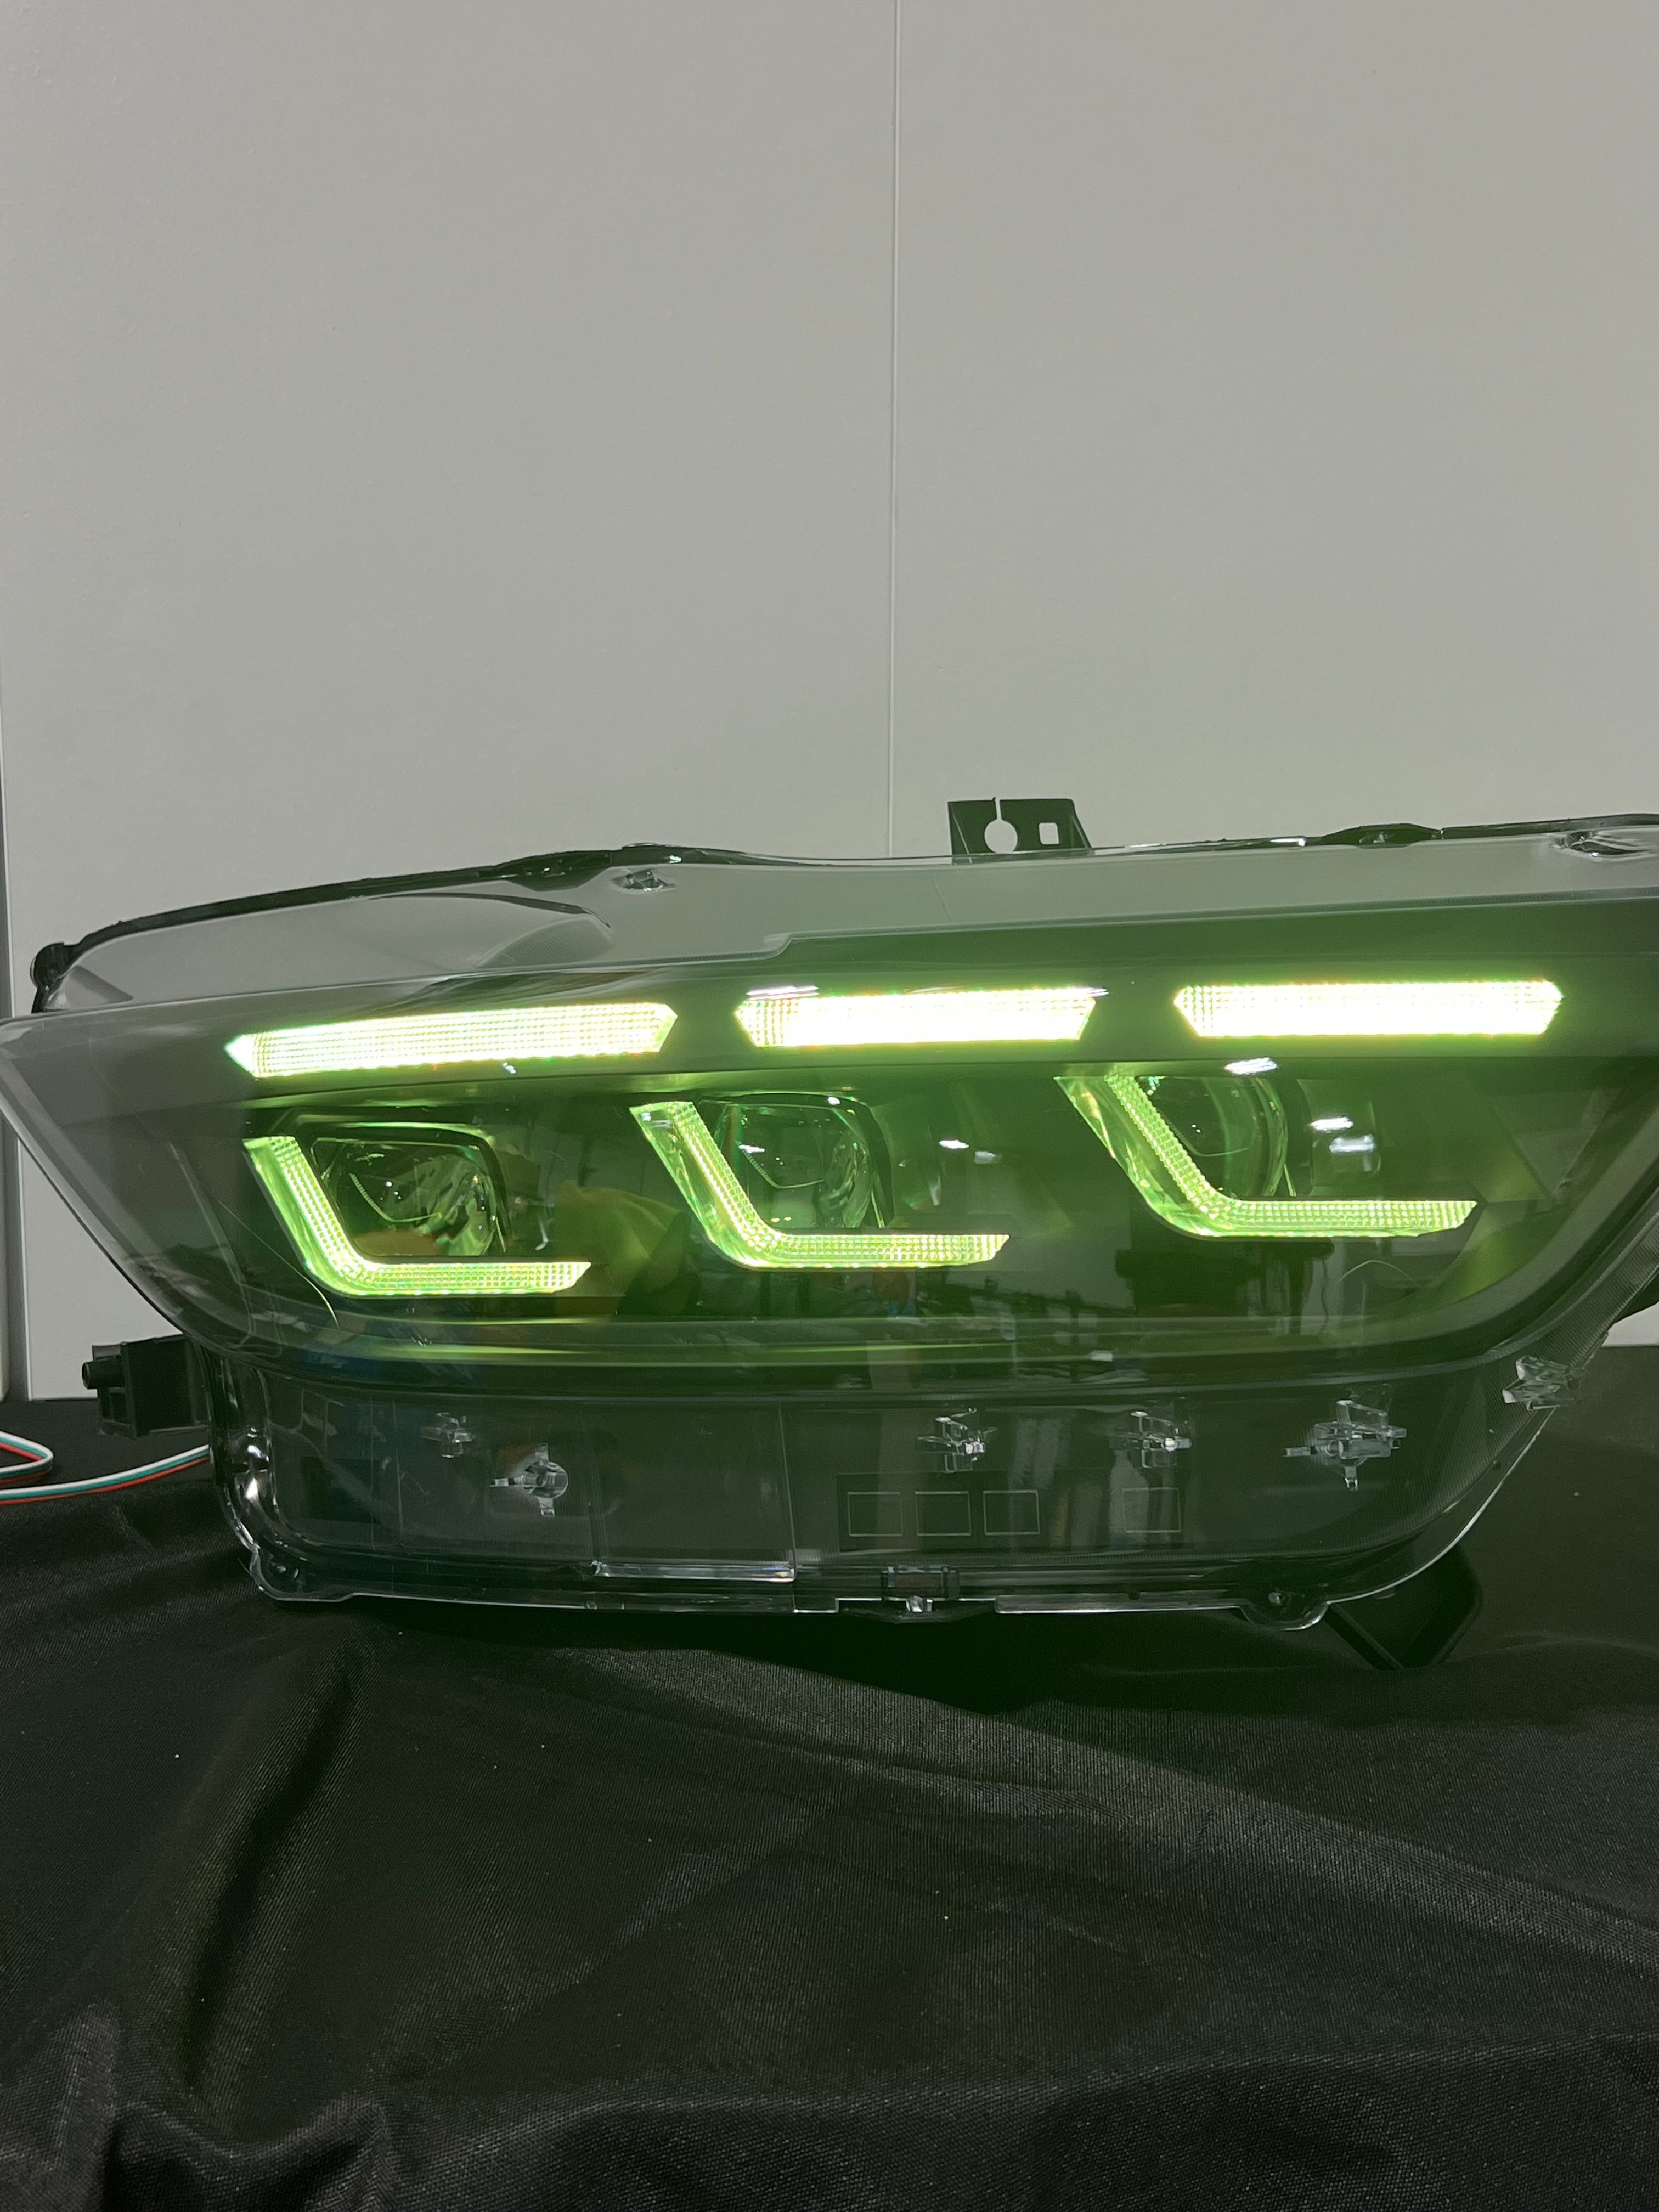 2015 - 2017 Ford Mustang “S650” Style Headlights